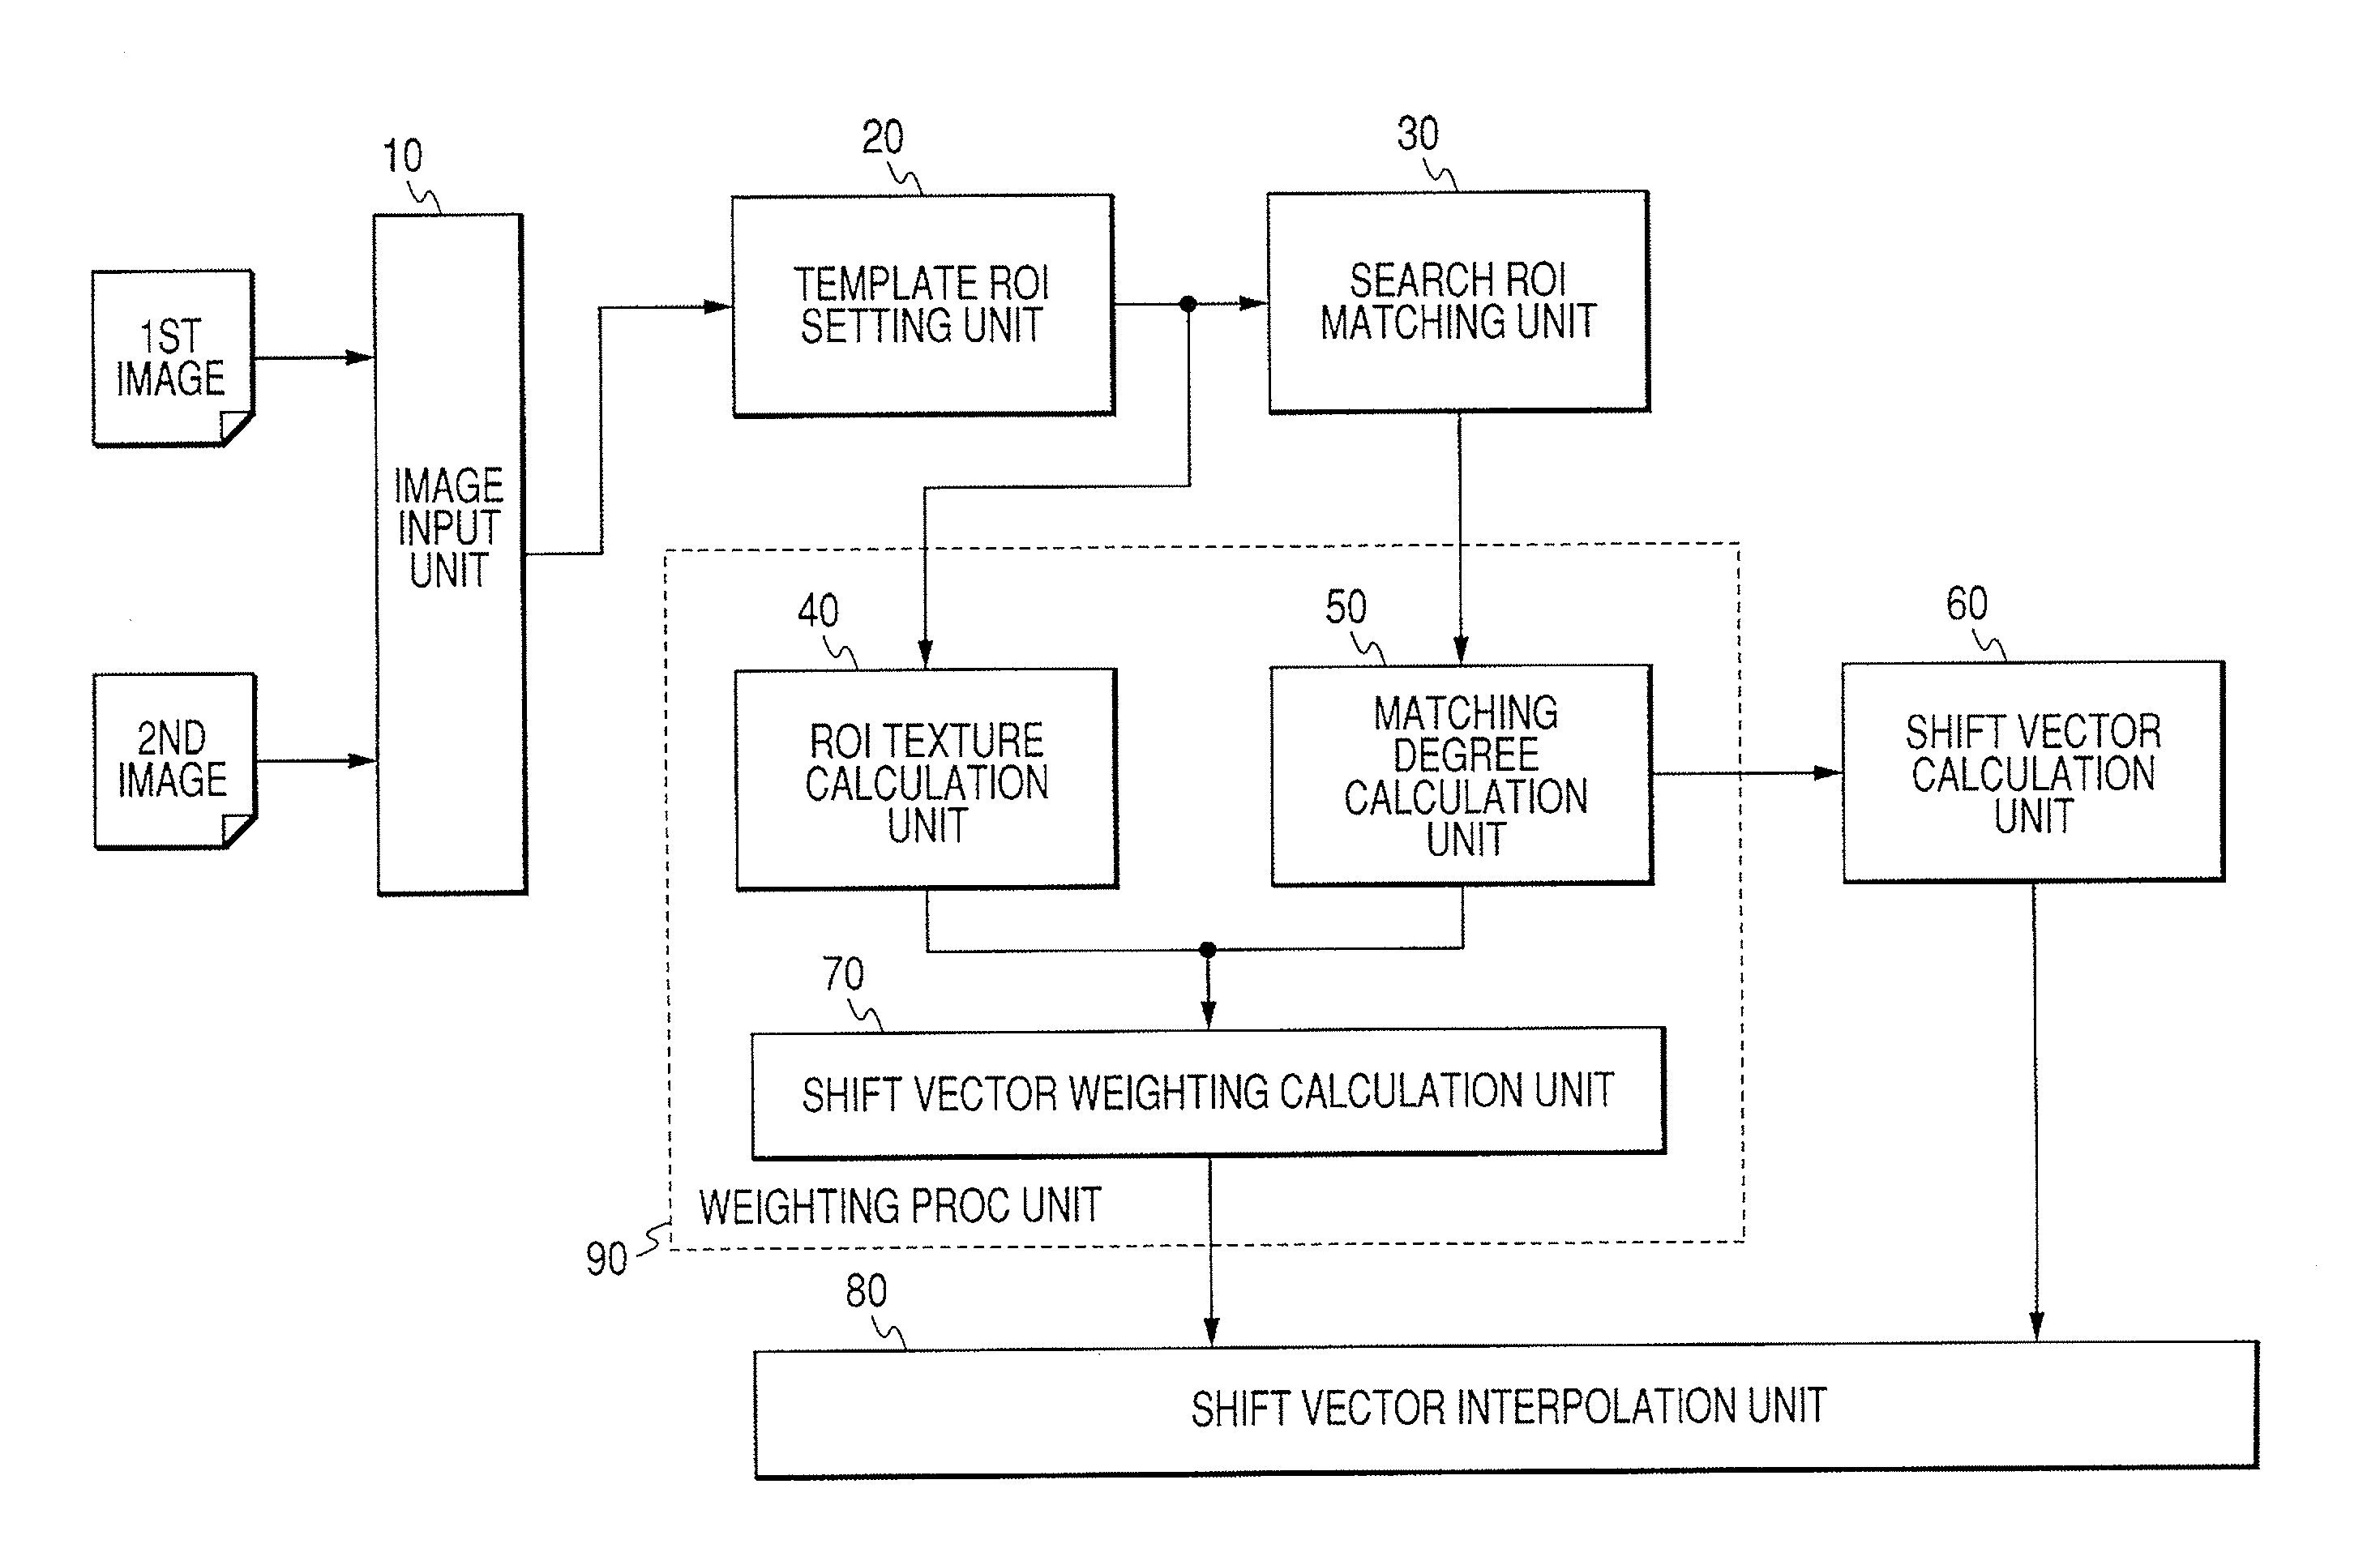 Image processing apparatus and method which match two images based on a shift vector